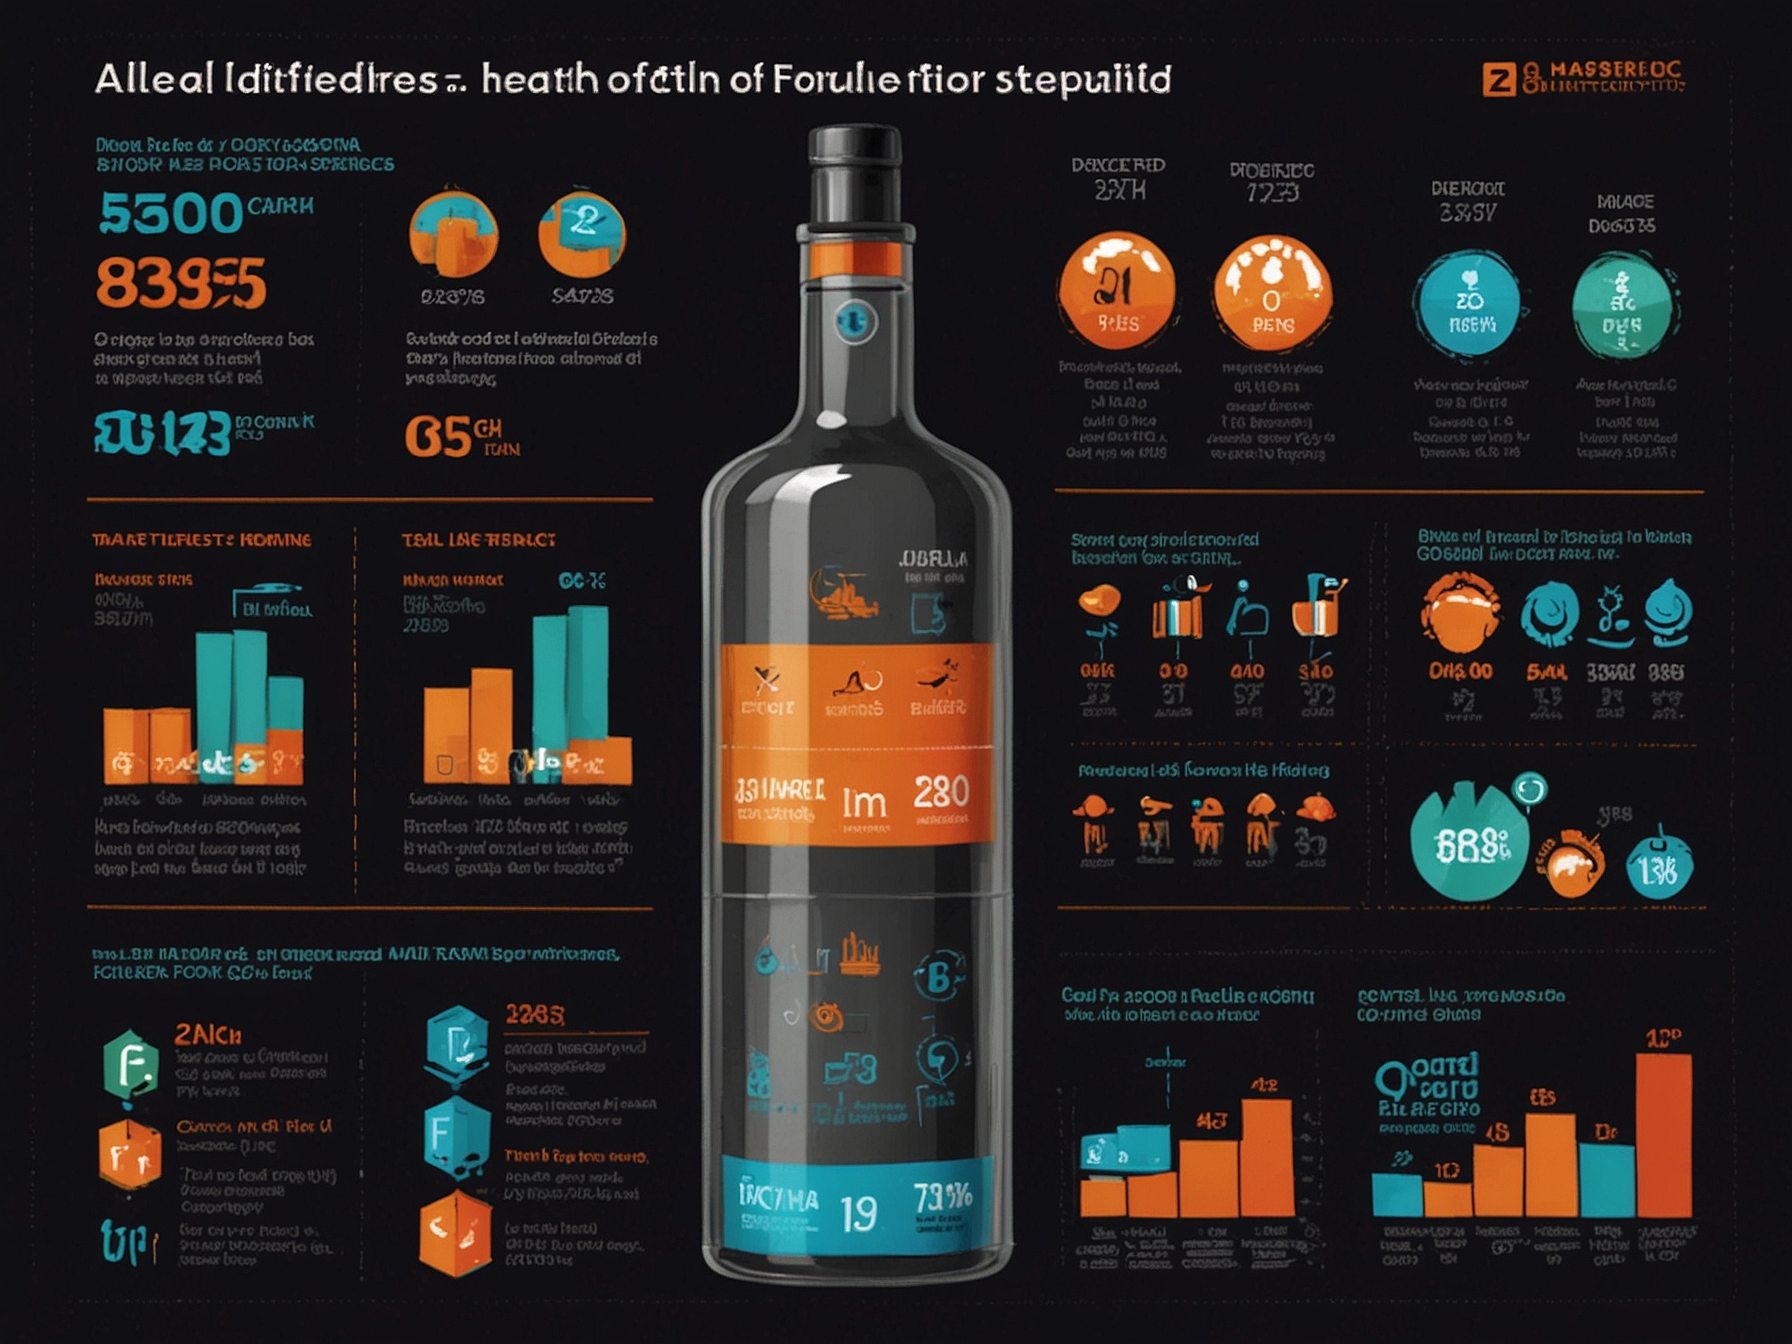 An infographic showcasing Allied Blenders and Distillers Ltd's financial health, featuring key statistics such as their revenue of ₹2,500 crores and net profit of ₹300 crores for the fiscal year ending March 2023.